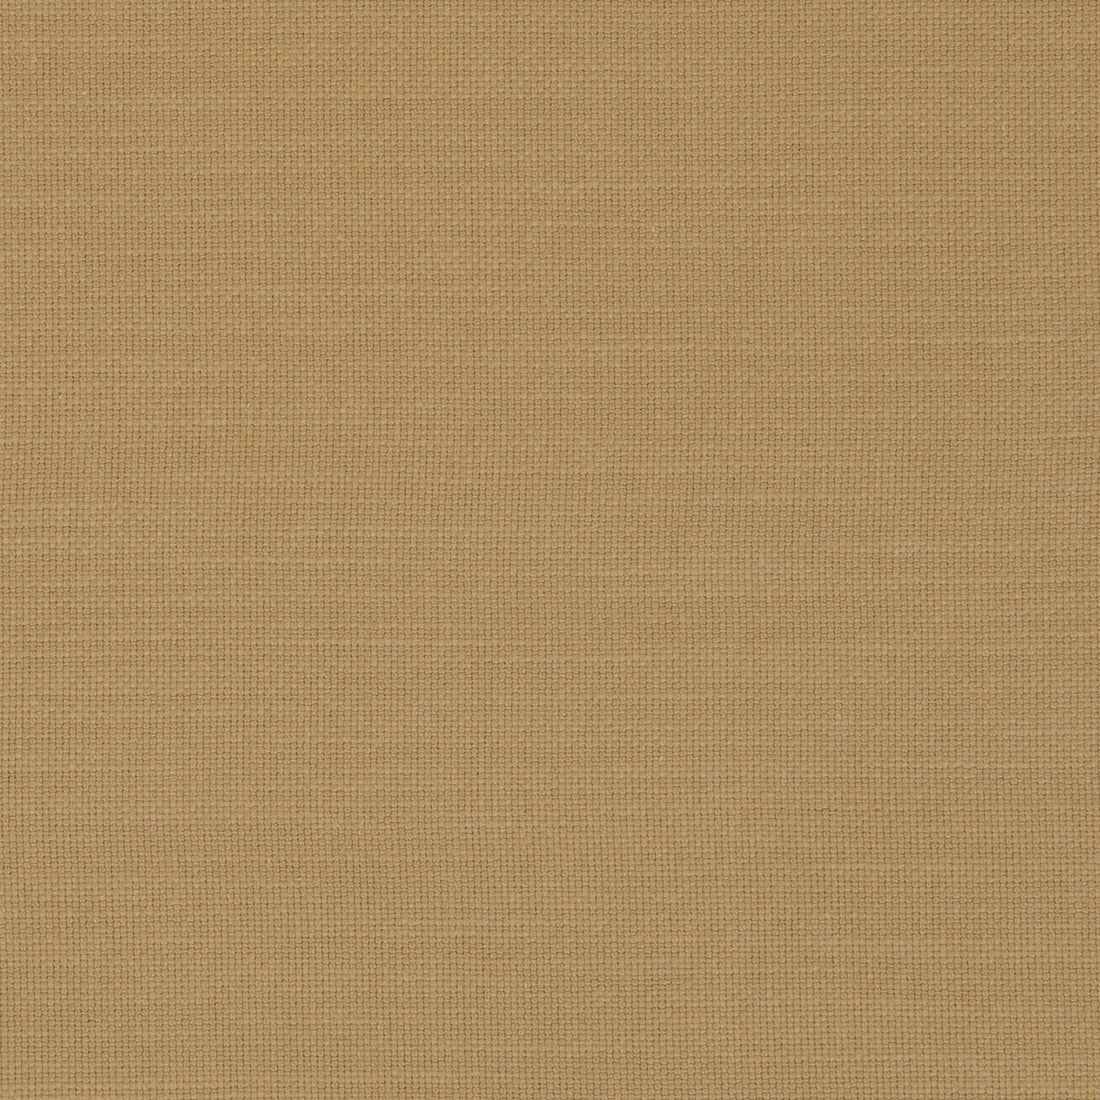 Nantucket fabric in malt color - pattern F0594/33.CAC.0 - by Clarke And Clarke in the Clarke &amp; Clarke Nantucket collection